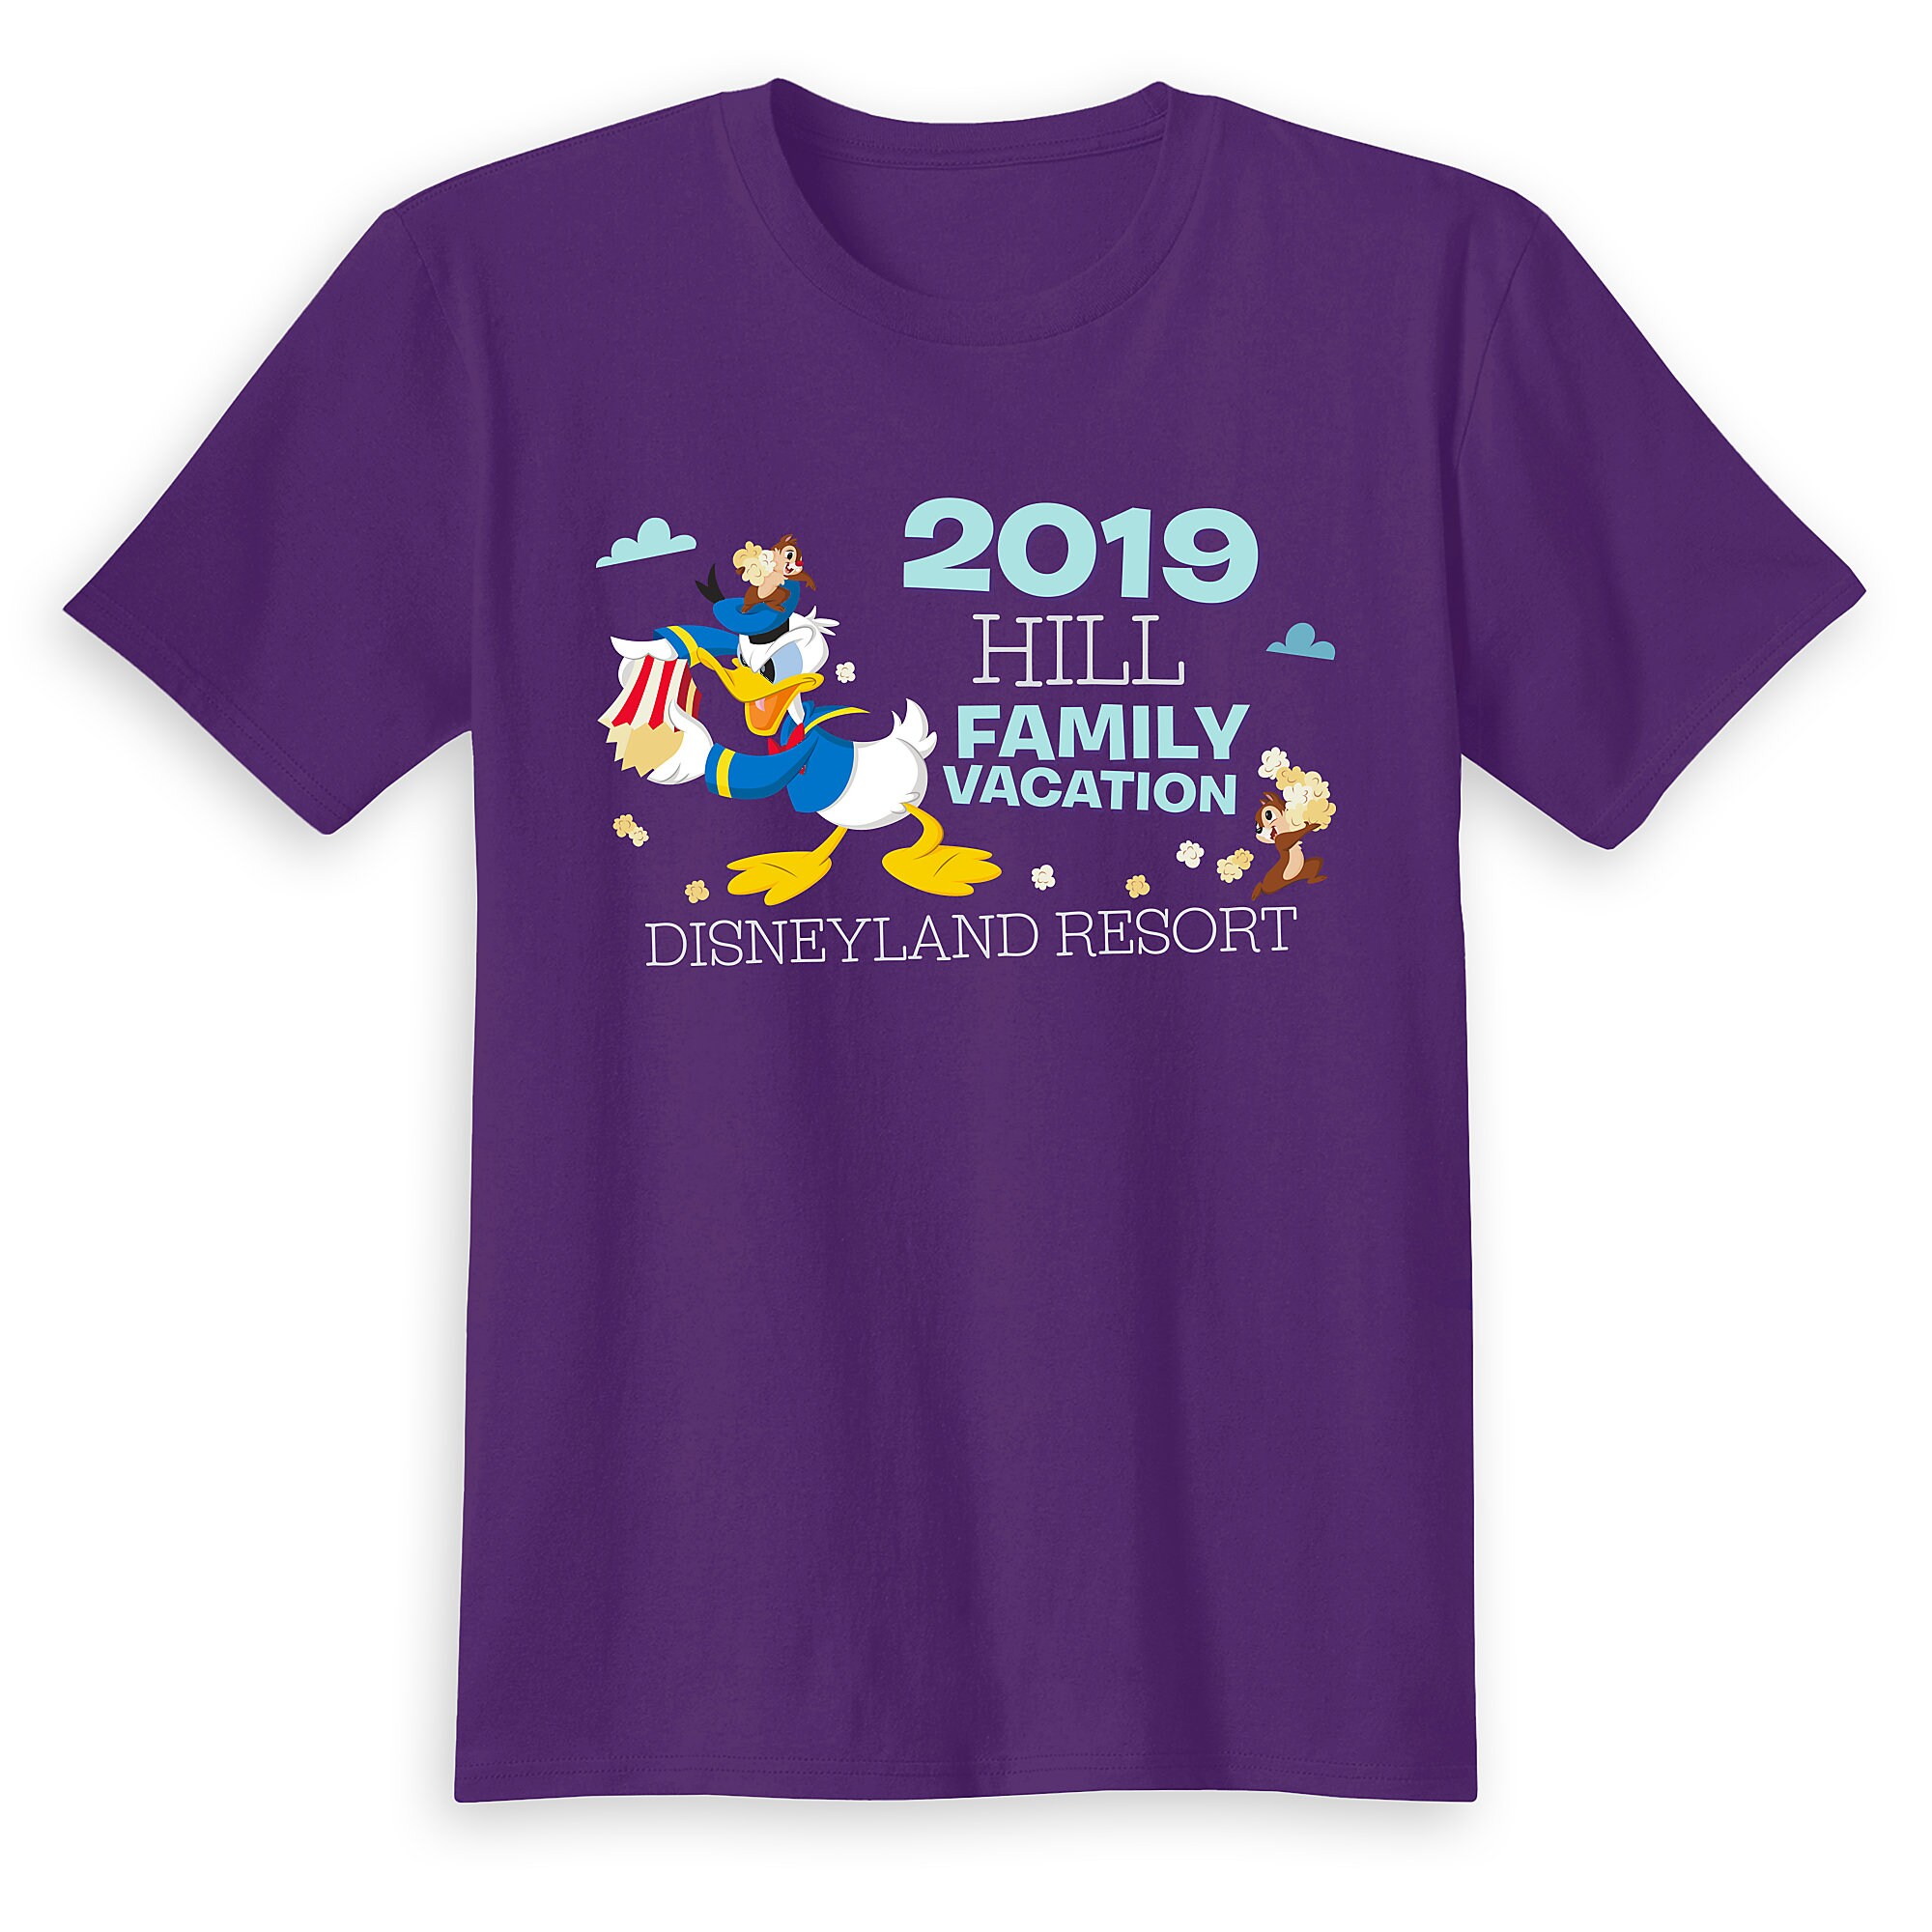 Kids' Donald Duck and Chip 'n Dale Family Vacation T-Shirt - Disneyland Resort - Customized